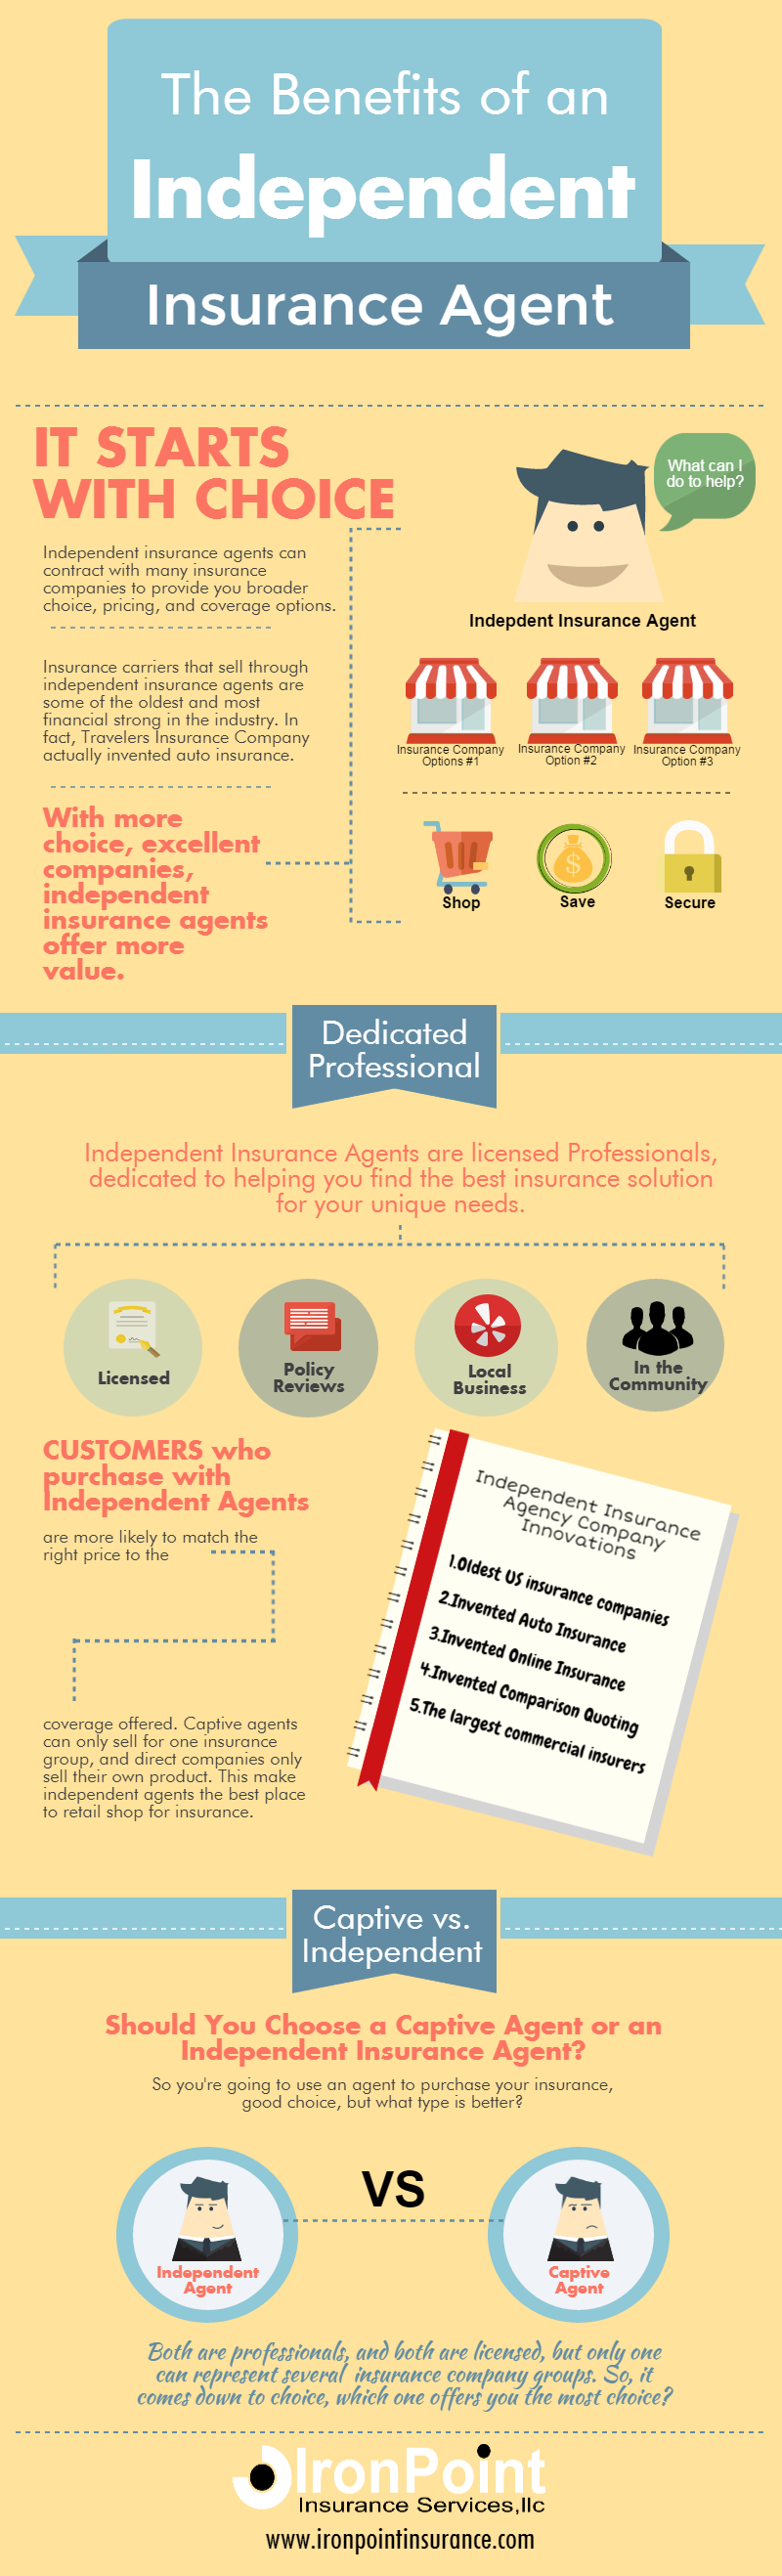 Benefits of Independent Insurance Agent